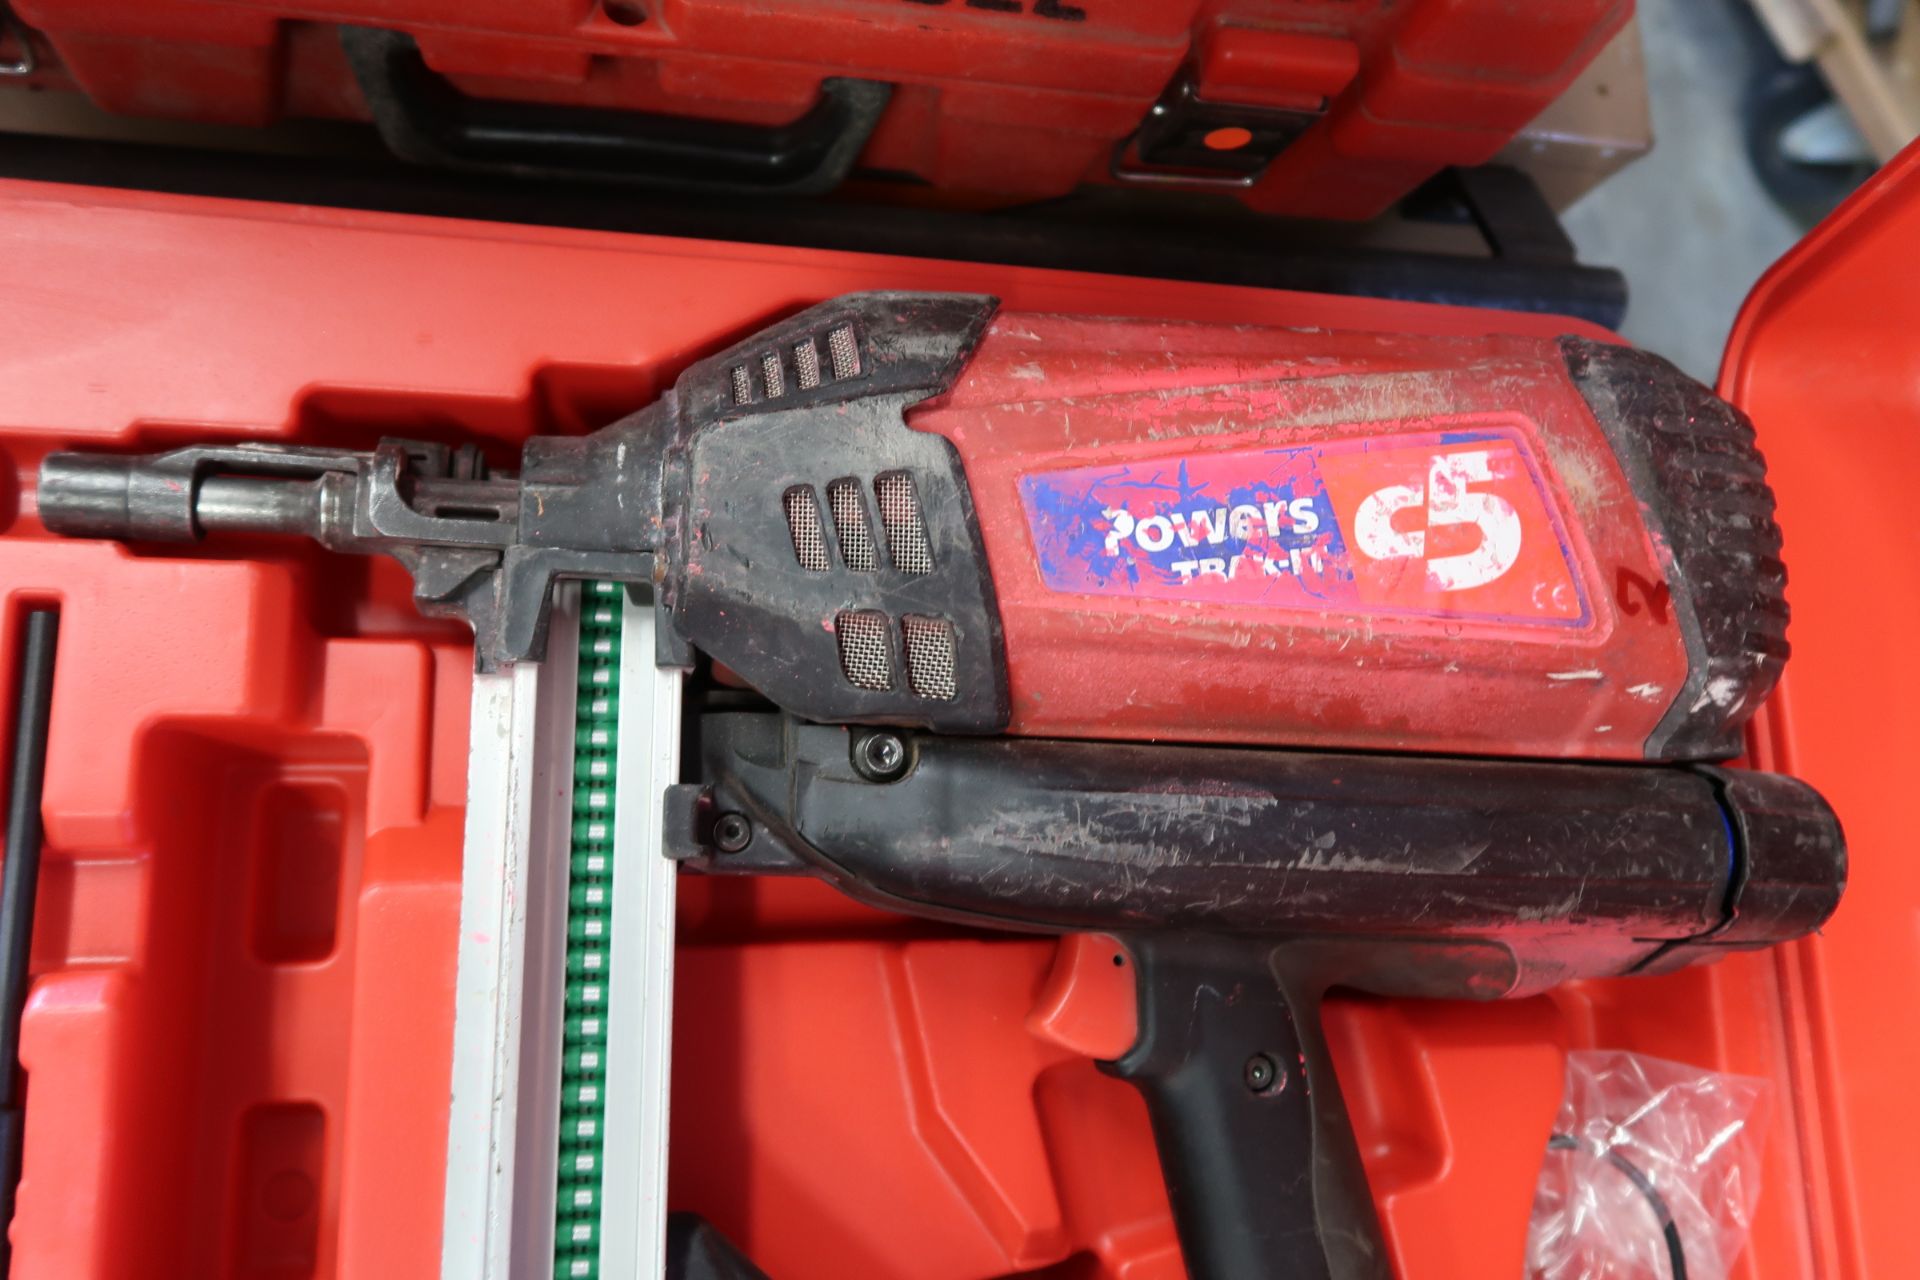 Powers "Trak-It C5" Cordless Nailer w/ Batteries and Charger (SOLD AS-IS - NO WARRANTY) - Image 3 of 5